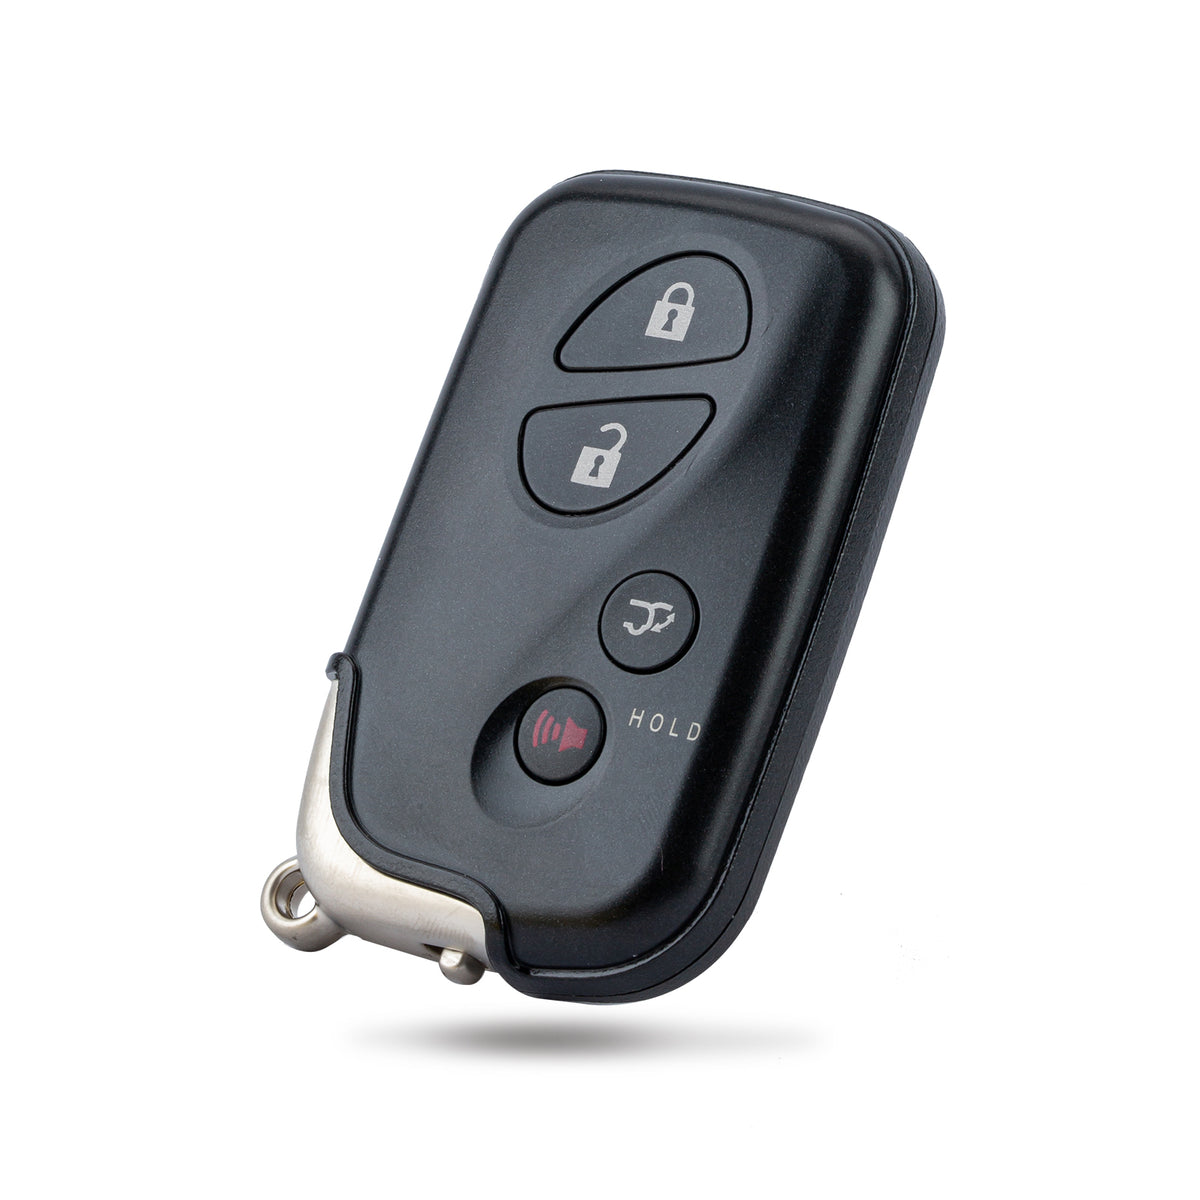 Extra-Partss Smart Car Key Fob Replacement for Lexus RX350 RX450H GX460 CT200H fits 2010 2011 2012 2013 2014 2015 Proximity 4 Button Remote HYQ14ACX 271451-5290